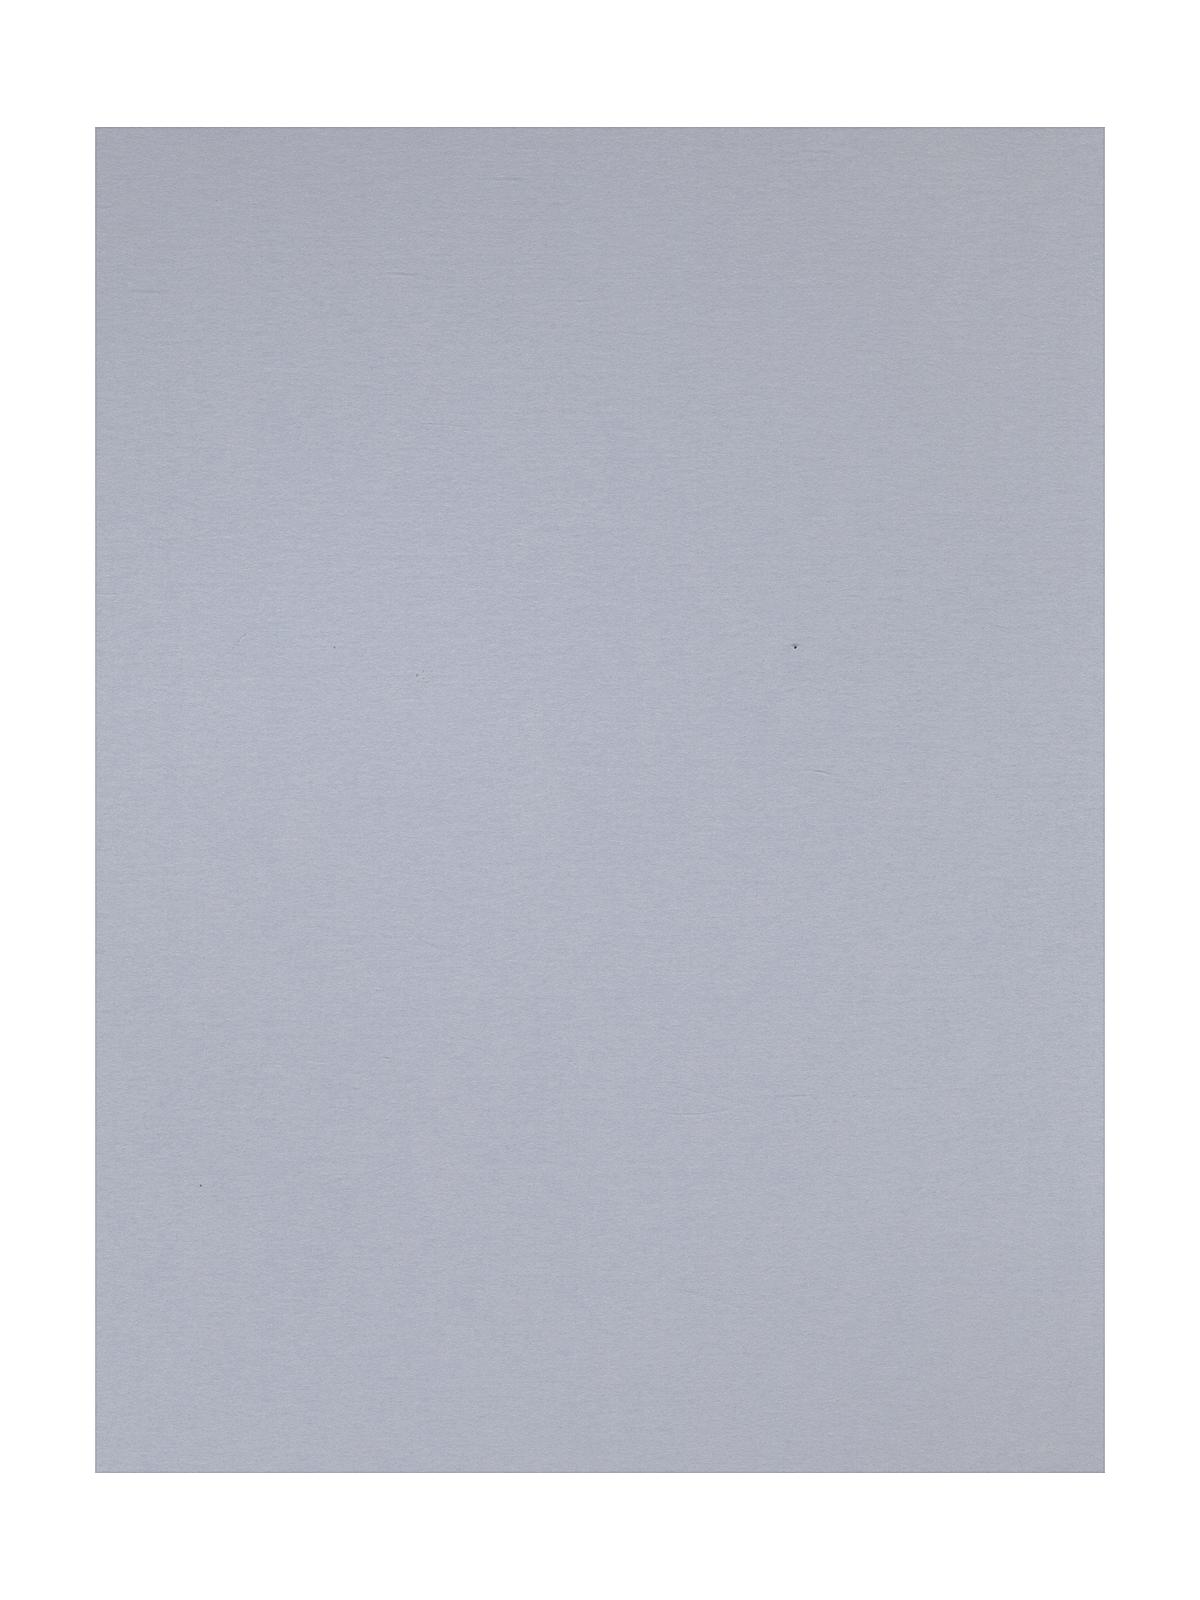 Colorline Heavyweight Paper Sheets Light Grey 300 Gsm 19 In. X 25 In.